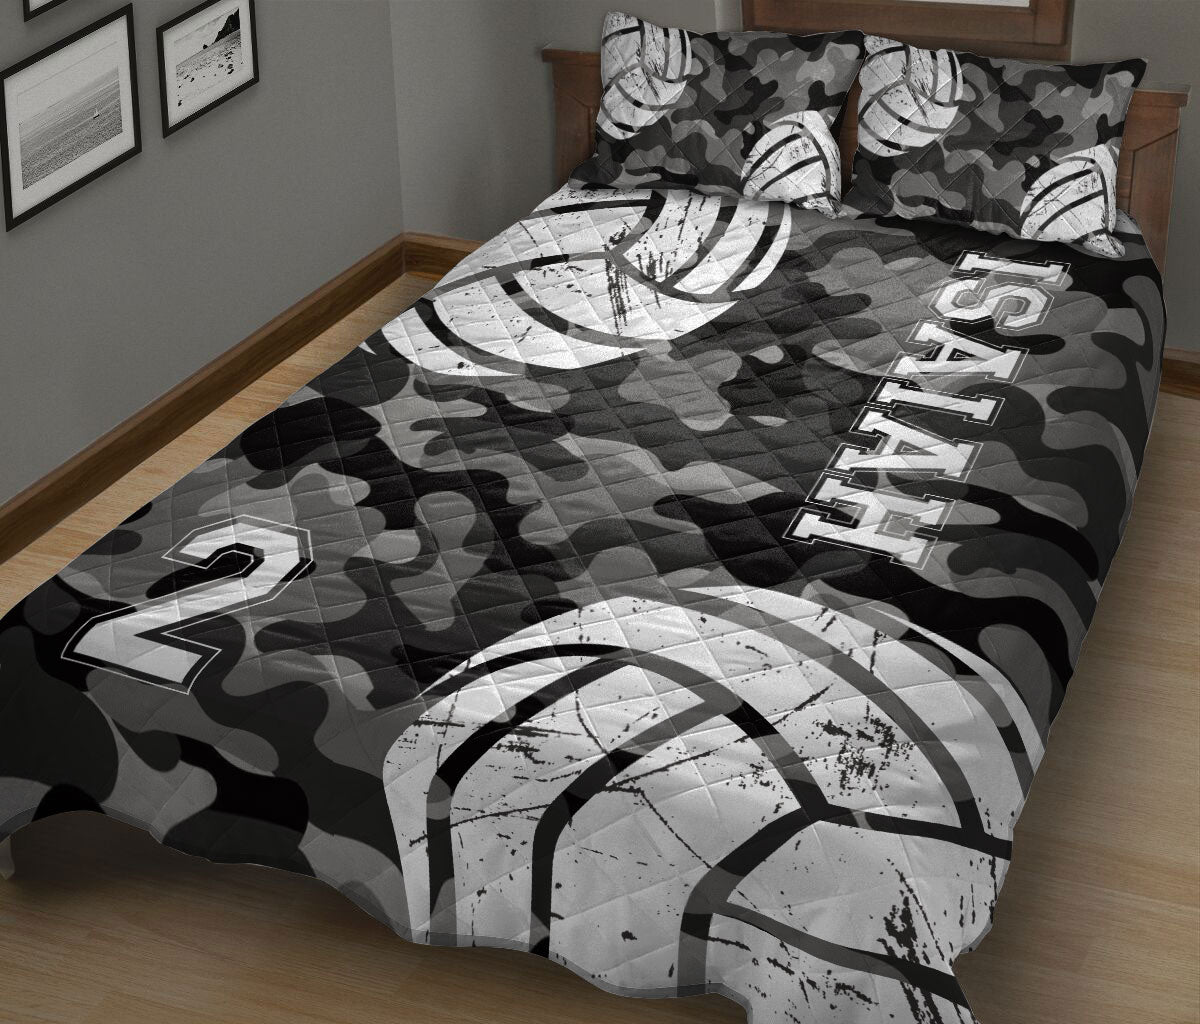 Ohaprints-Quilt-Bed-Set-Pillowcase-Volleyball-Ball-Black-Camo-Pattern-Sports-Gift-Custom-Personalized-Name-Number-Blanket-Bedspread-Bedding-786-King (90'' x 100'')